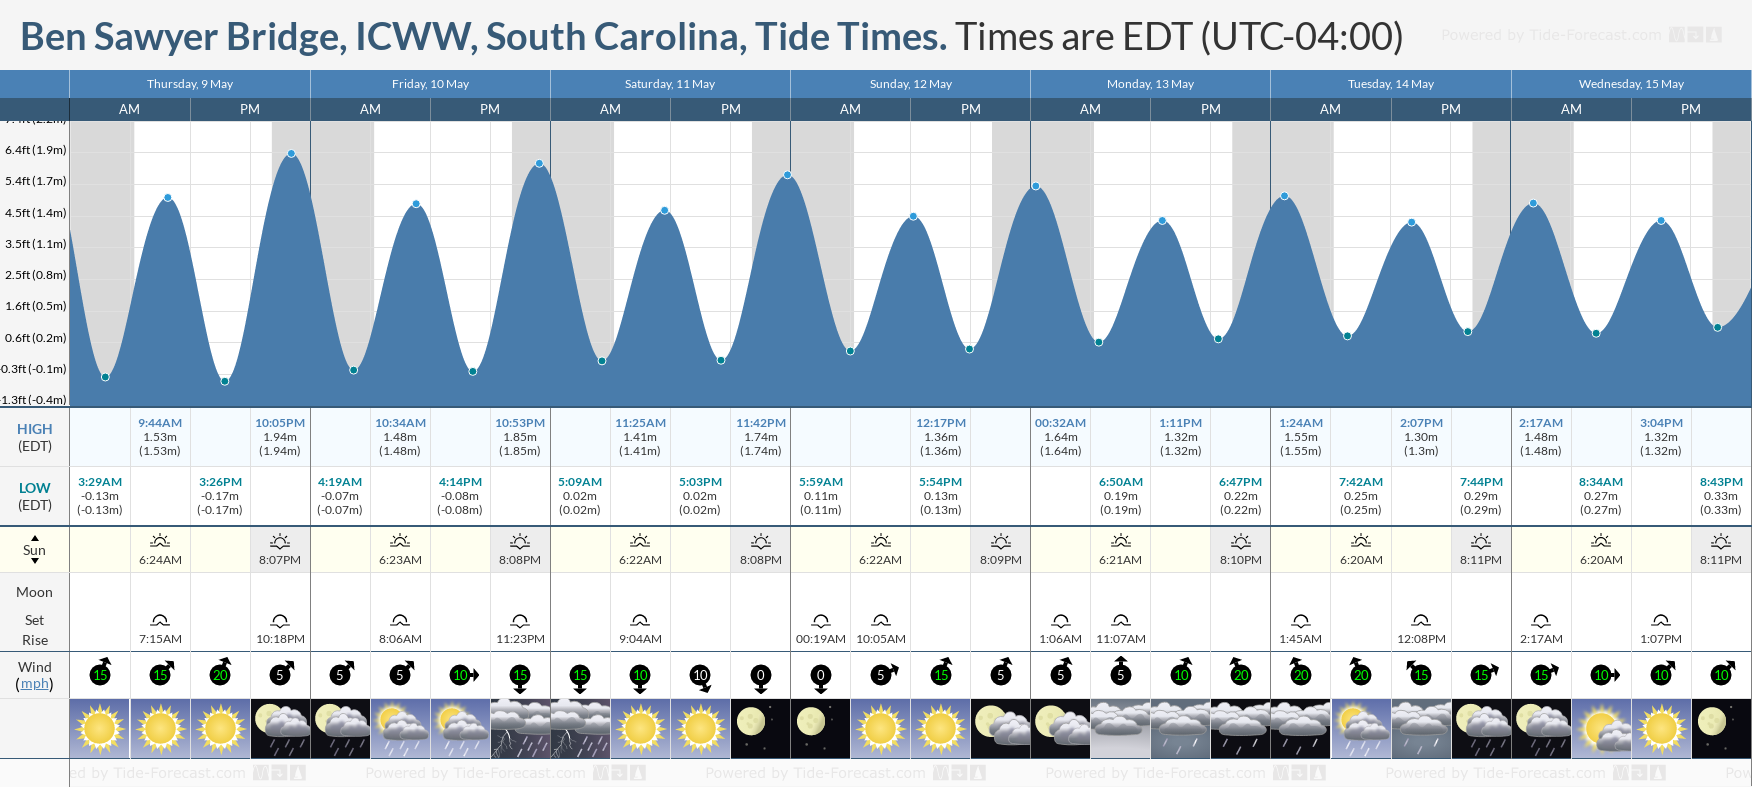 Ben Sawyer Bridge, ICWW, South Carolina Tide Chart including high and low tide tide times for the next 7 days